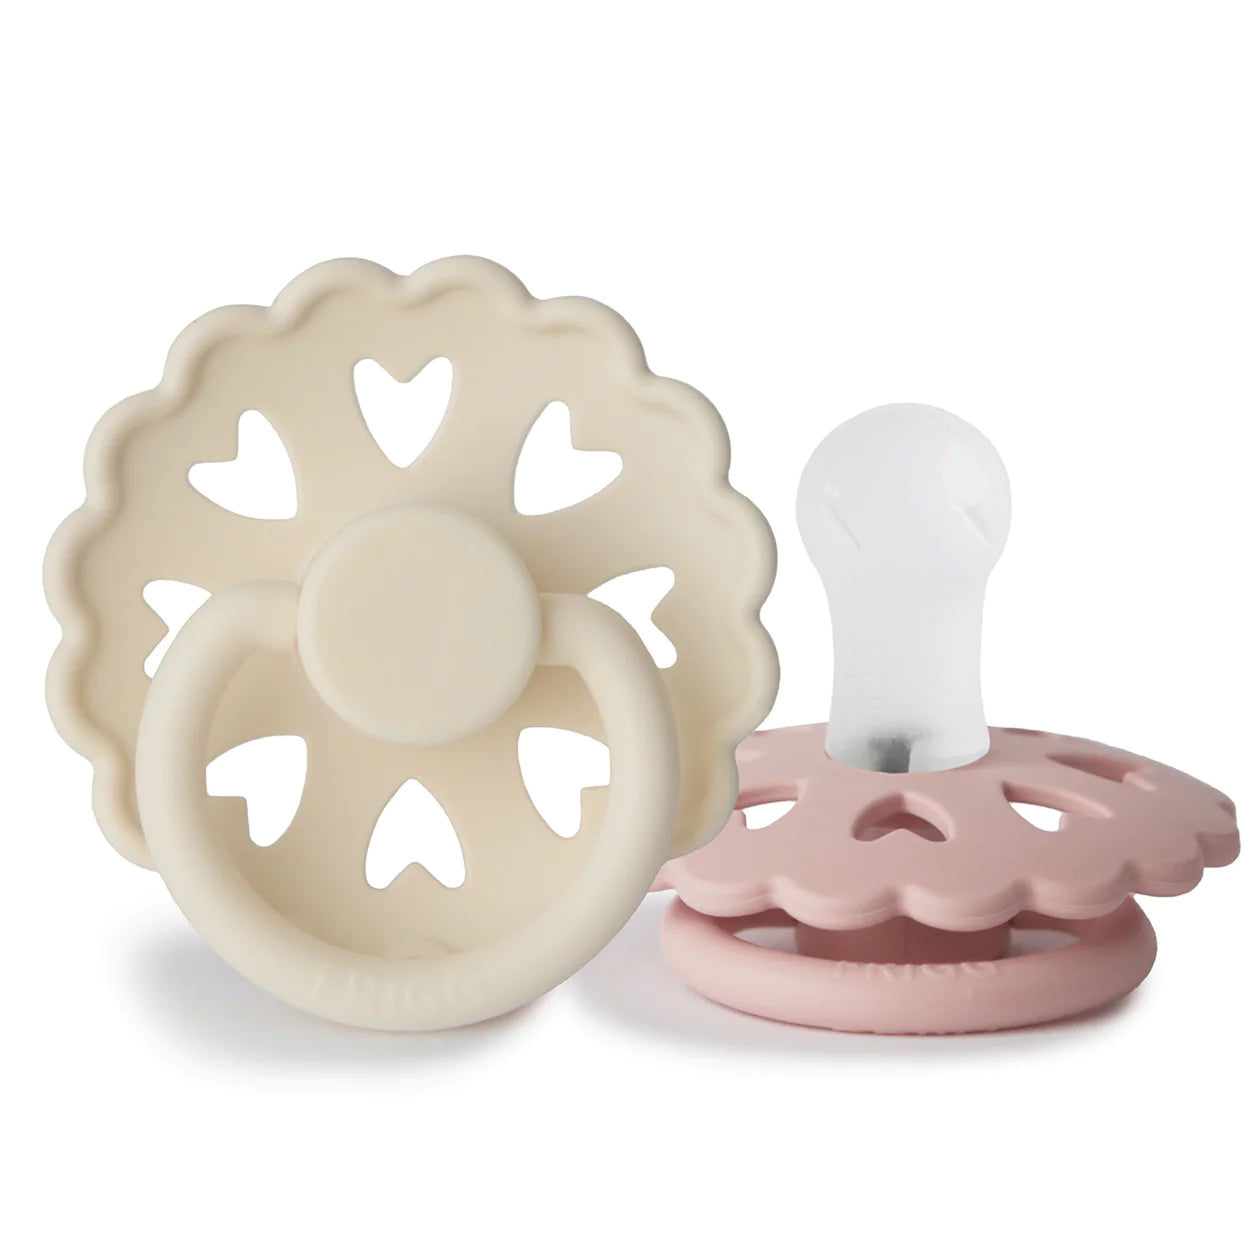 FRIGG Andersen Fairytale Silicone Pacifier 2-Pack Cream Blush